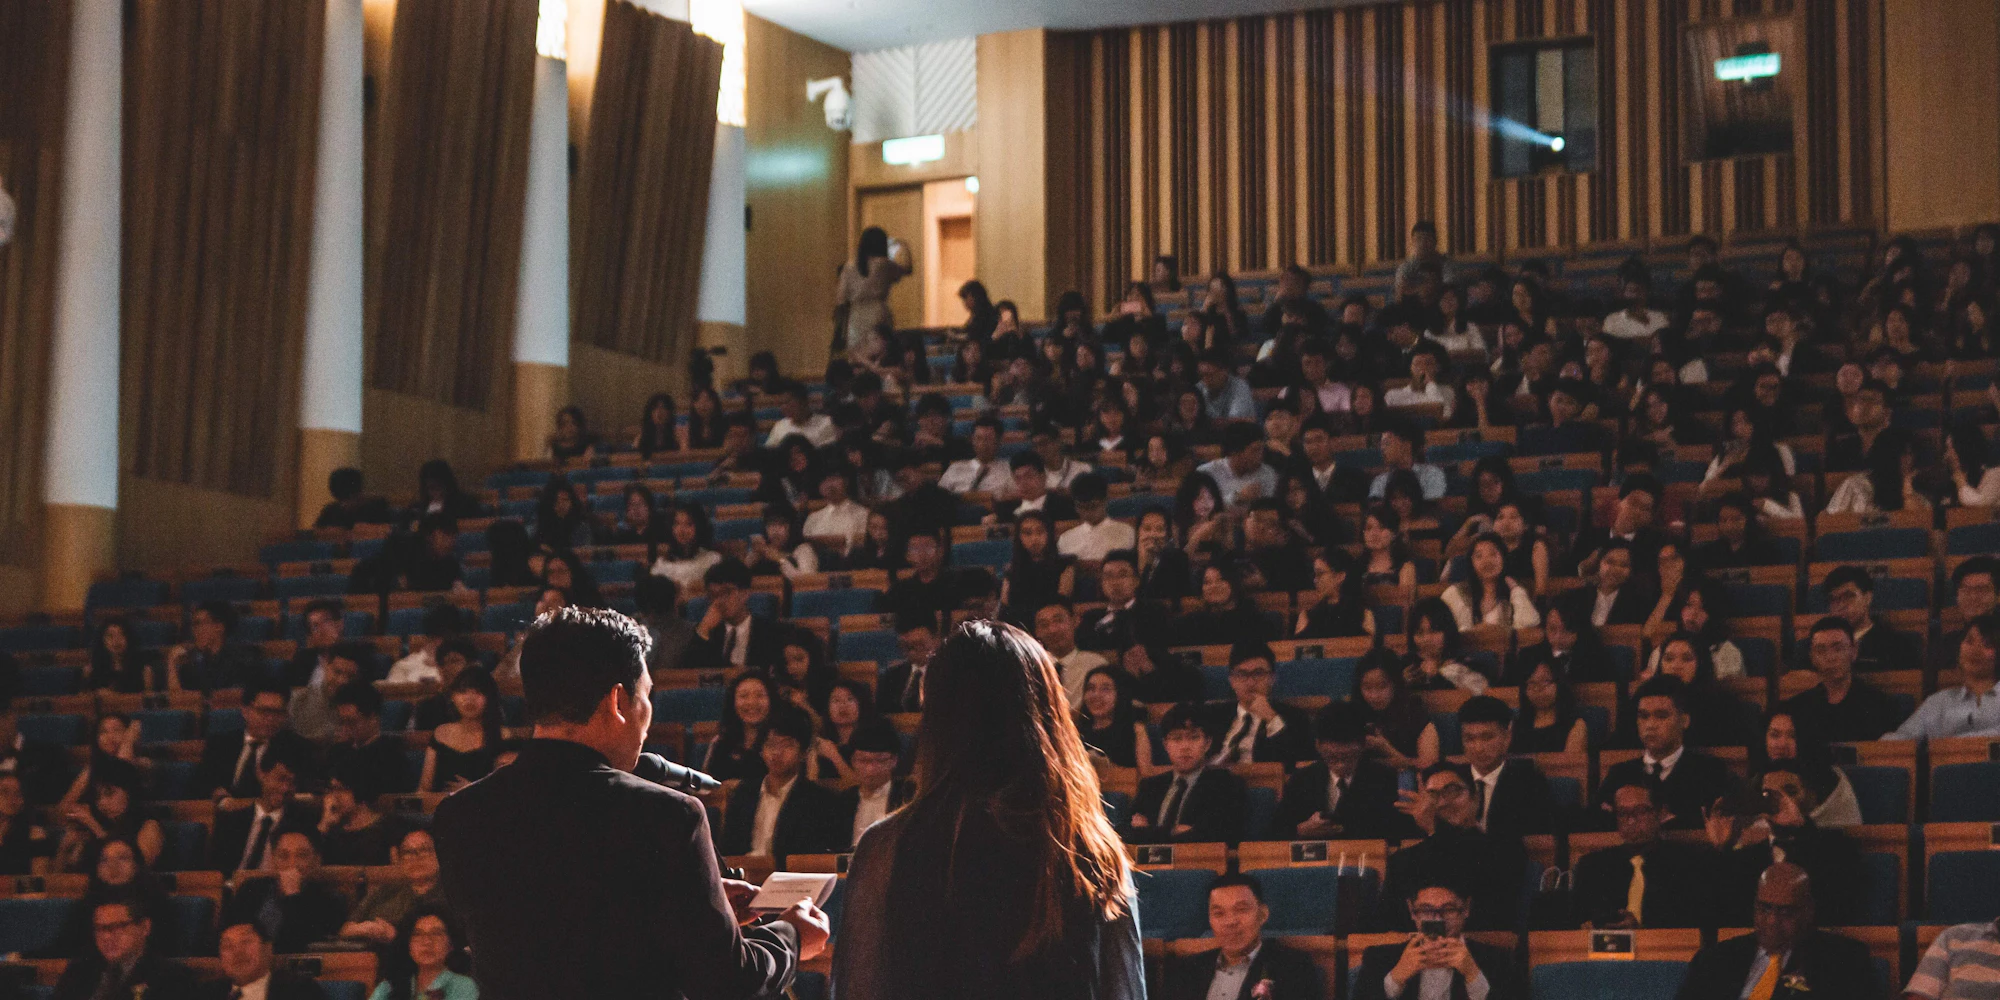 Two speakers presenting in front of a crowded conference hall.